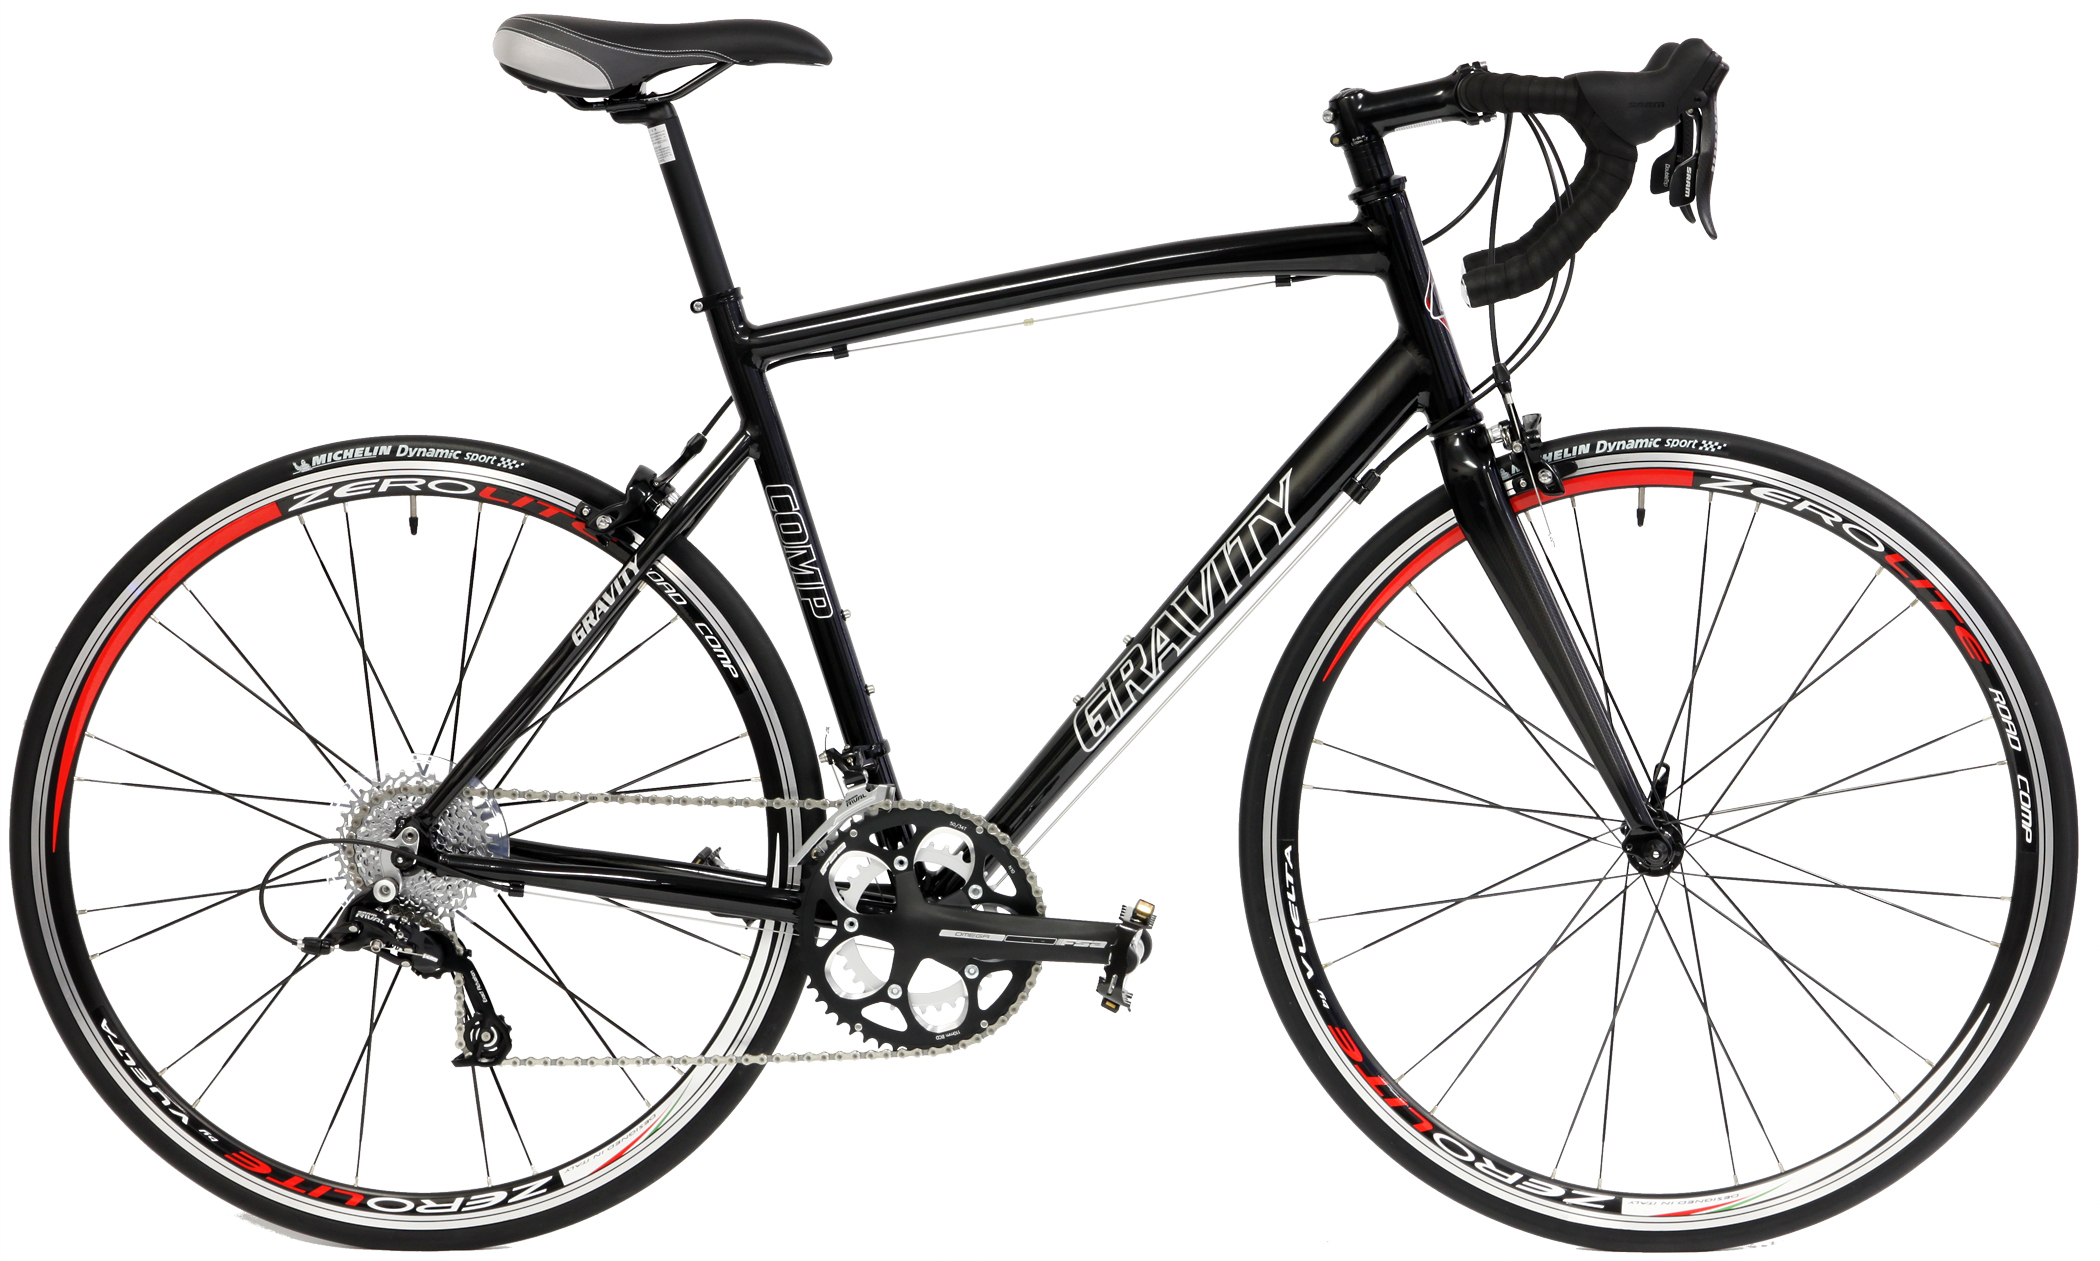 cheap road bikes for sale